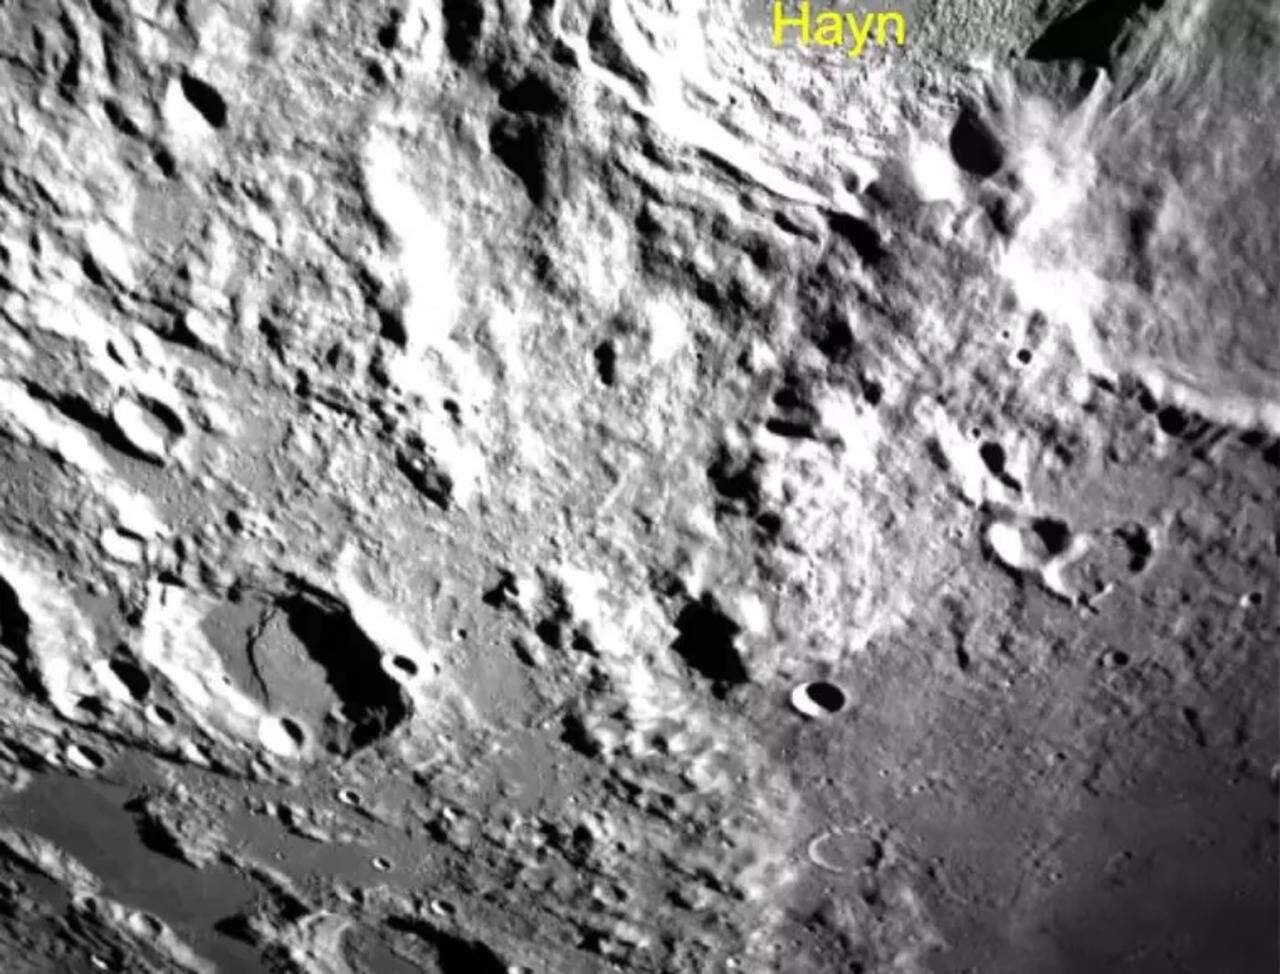 Chandrayaan-3’s Vikram lander sends images just 70 km from Moon, poised to touch down tomorrow